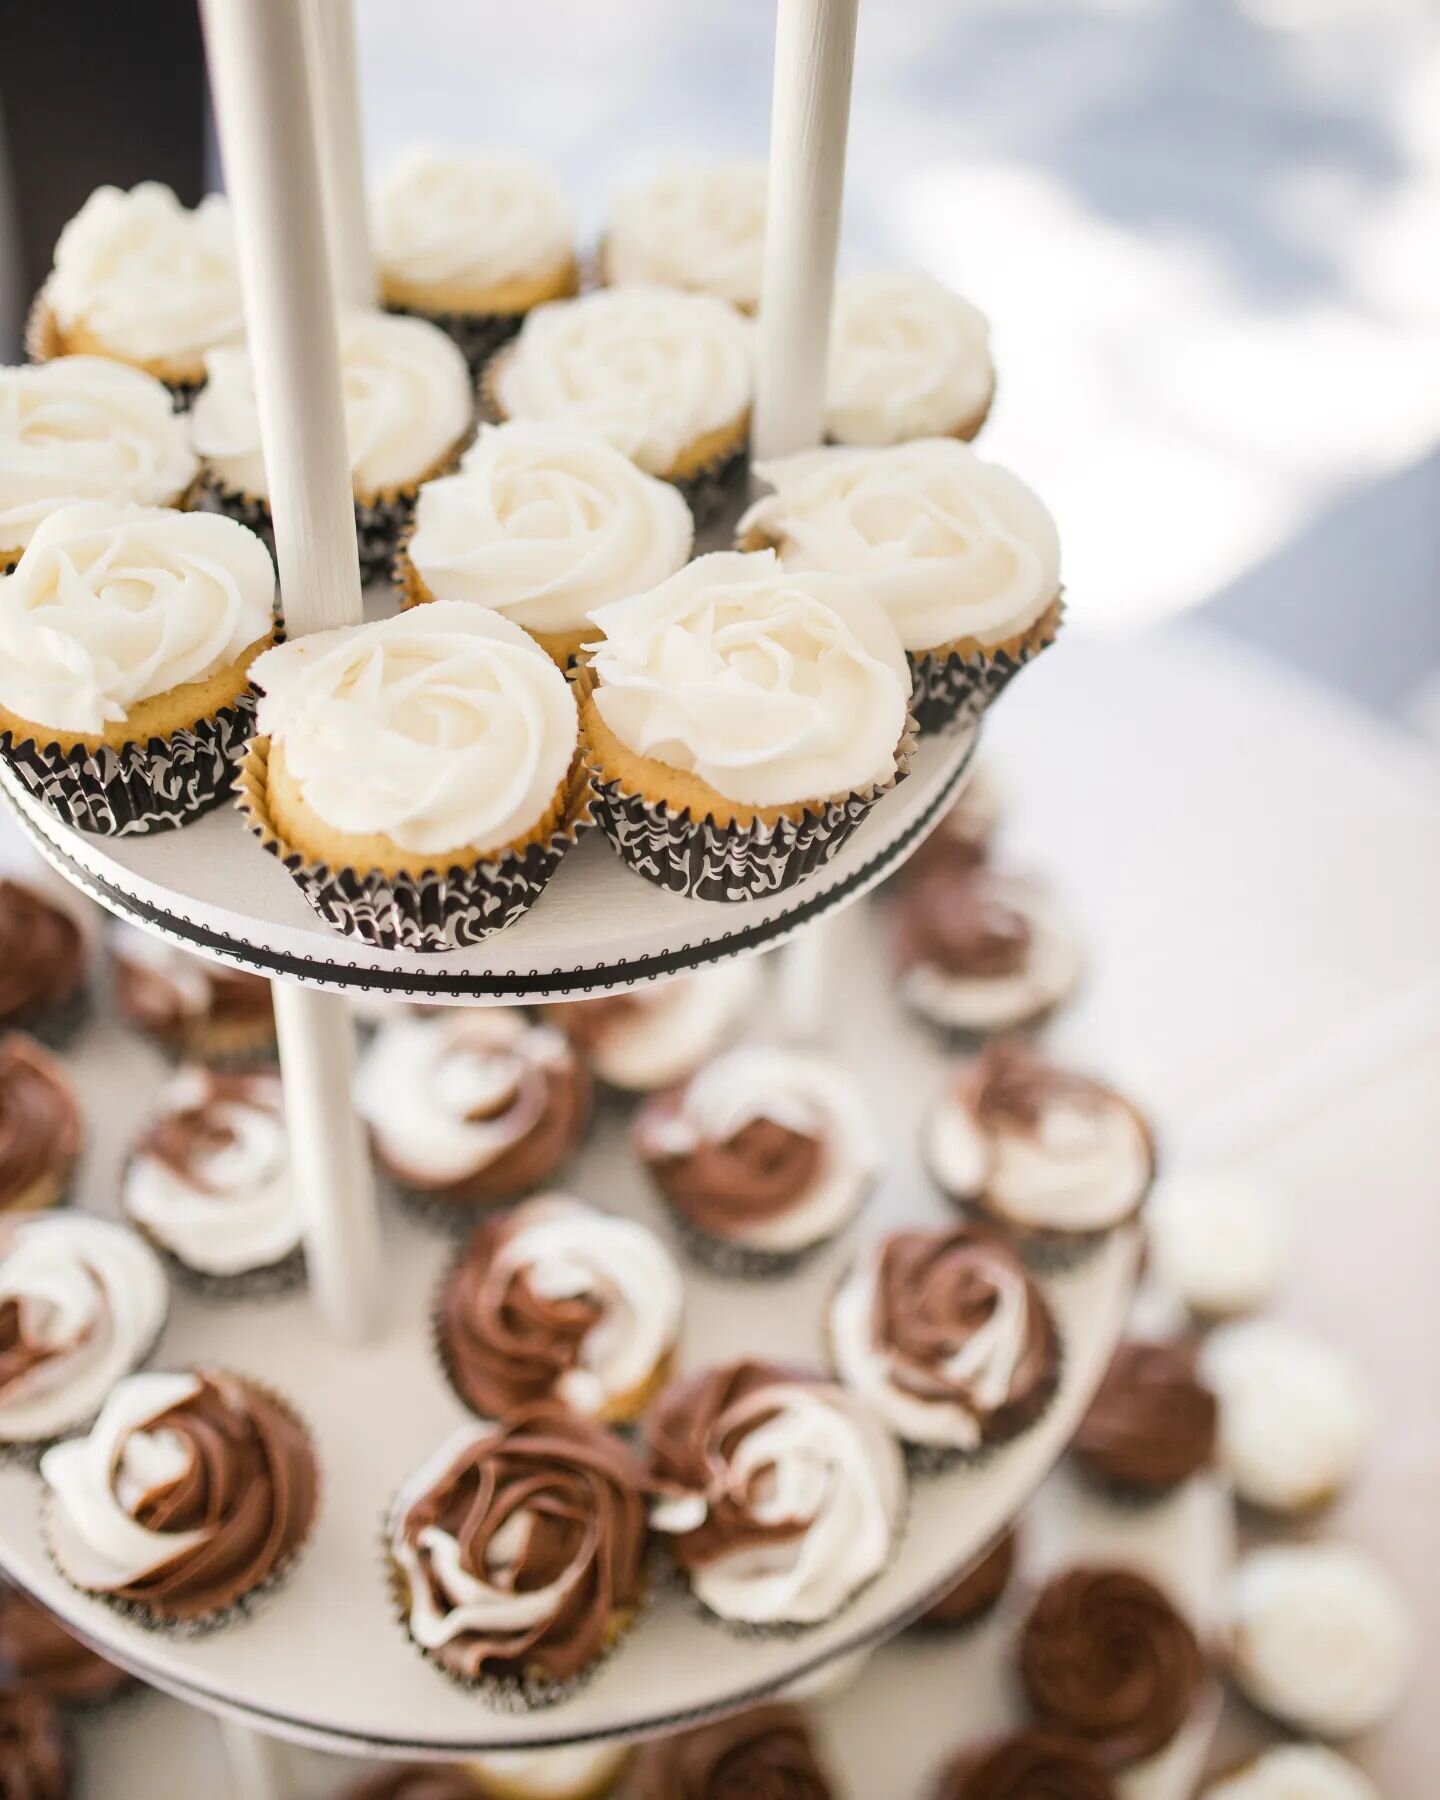 I love taking detail pictures of all the wedding treats (and eating them too!)